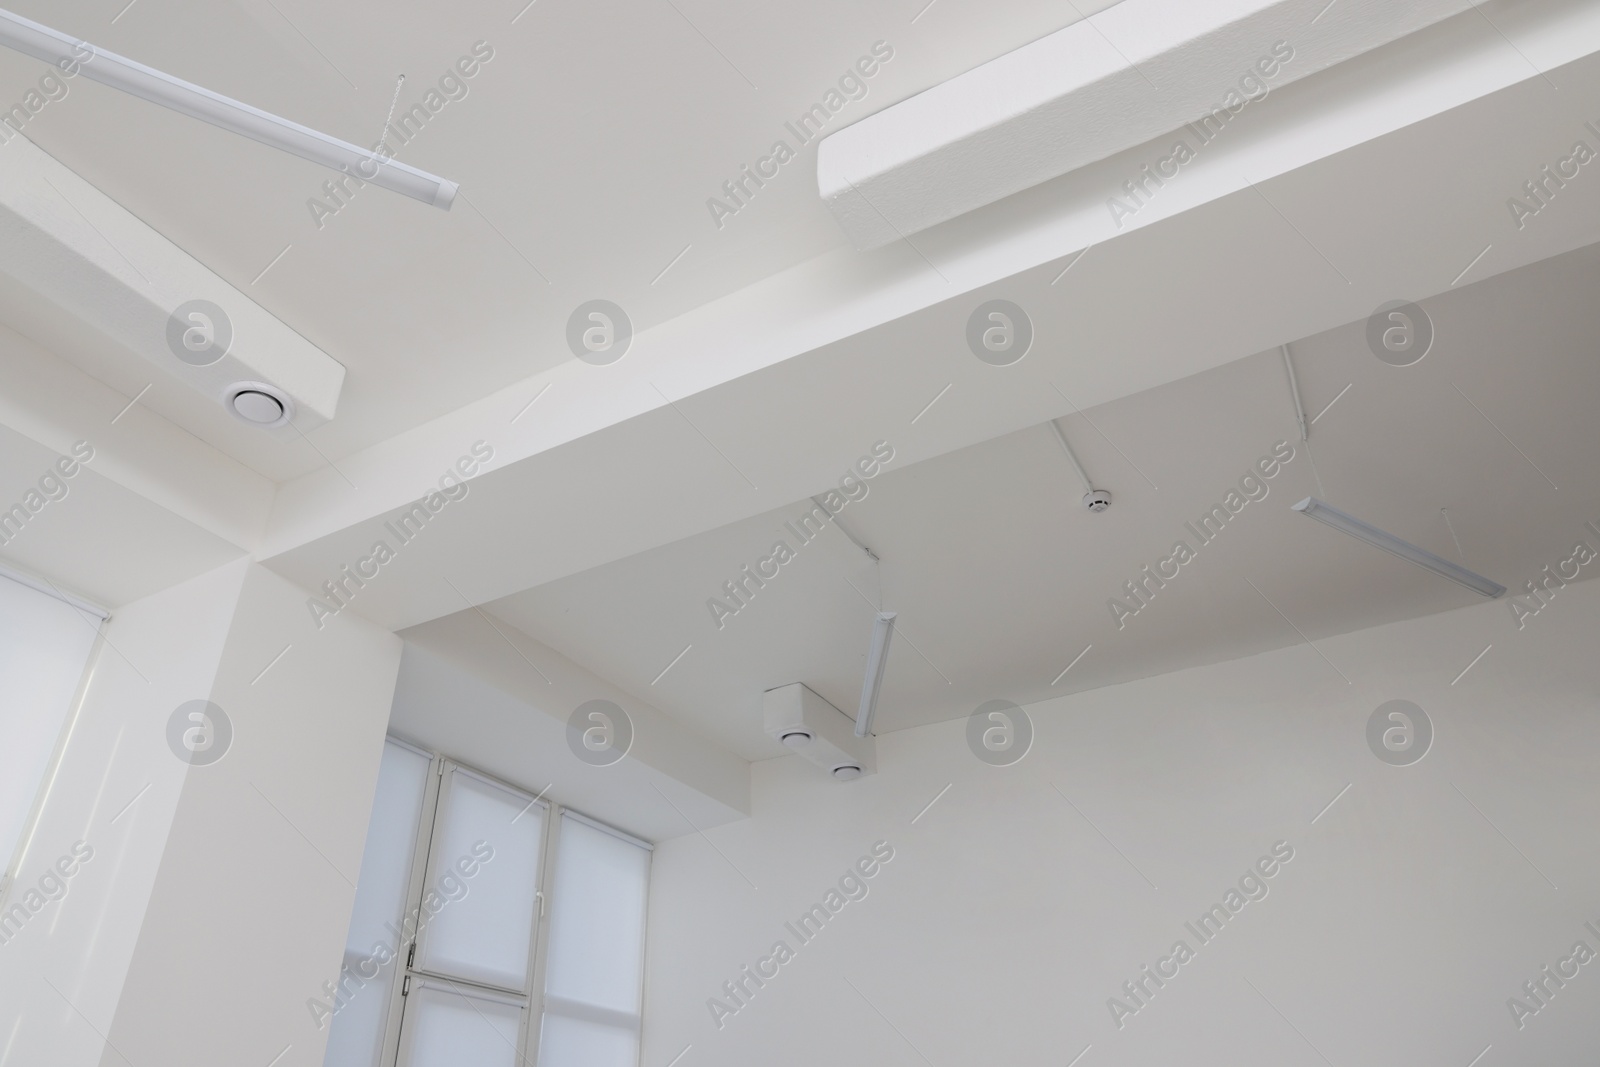 Photo of Ceiling with ventilation system and lights in room, low angle view